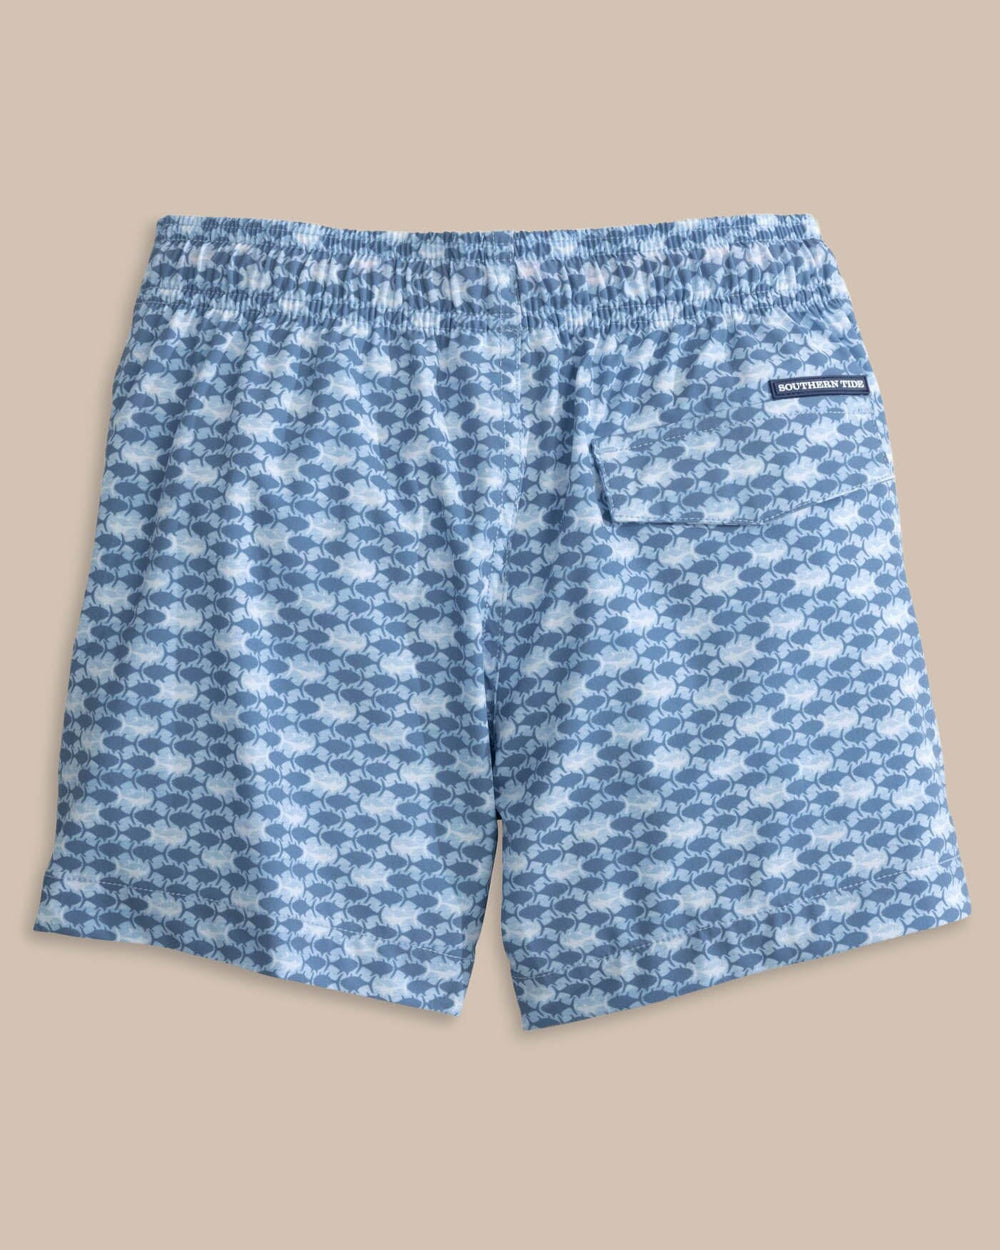 The back view of the Southern Tide Boys Heather Skipping Jacks Swim Trunk by Southern Tide - Heather Clearwater Blue